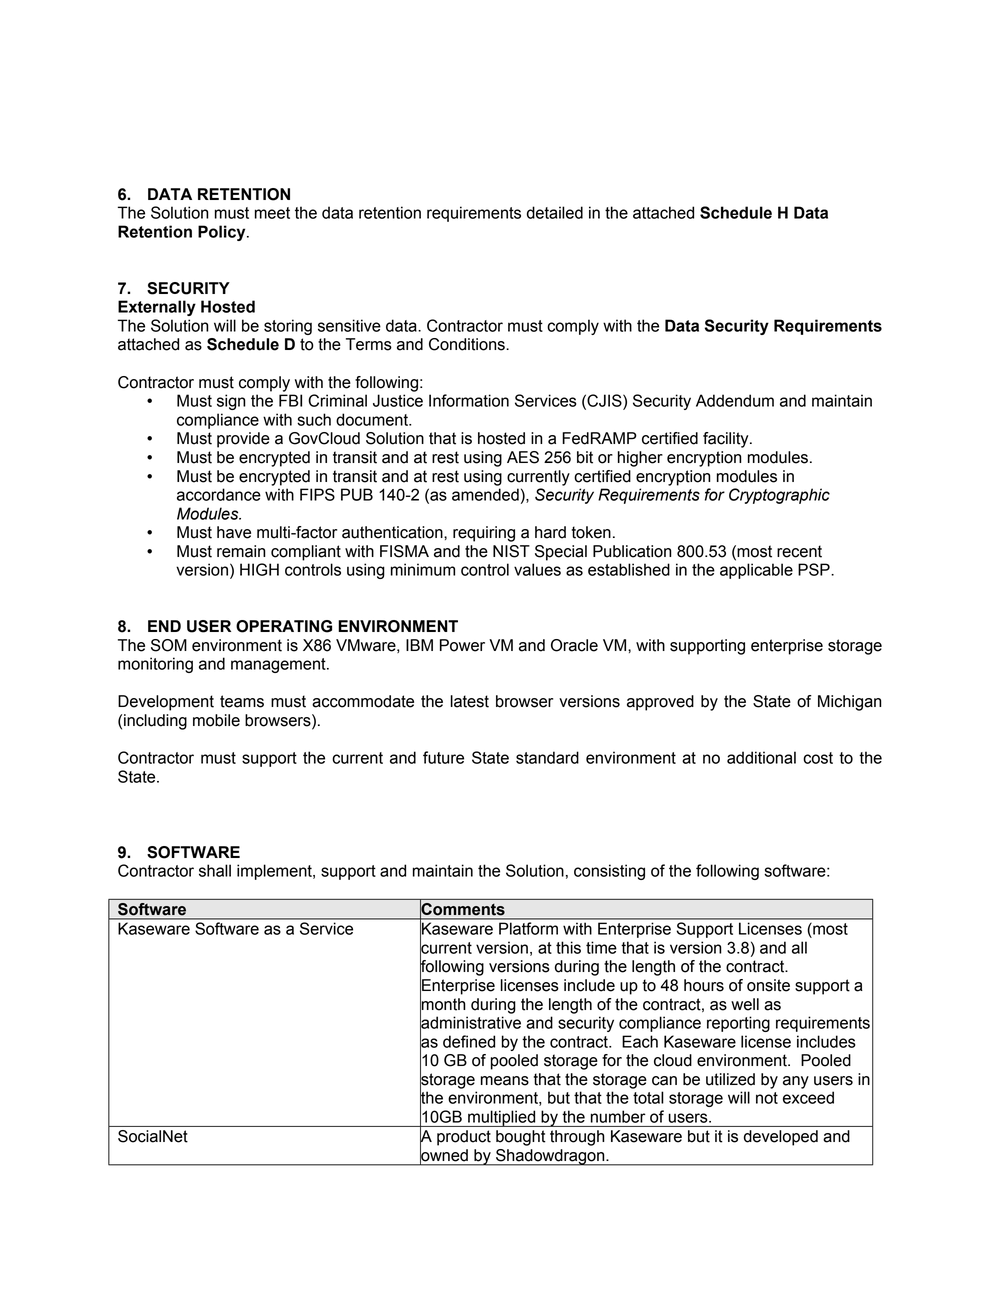 Page 41 from State of Michigan 2020 Kaseware contract